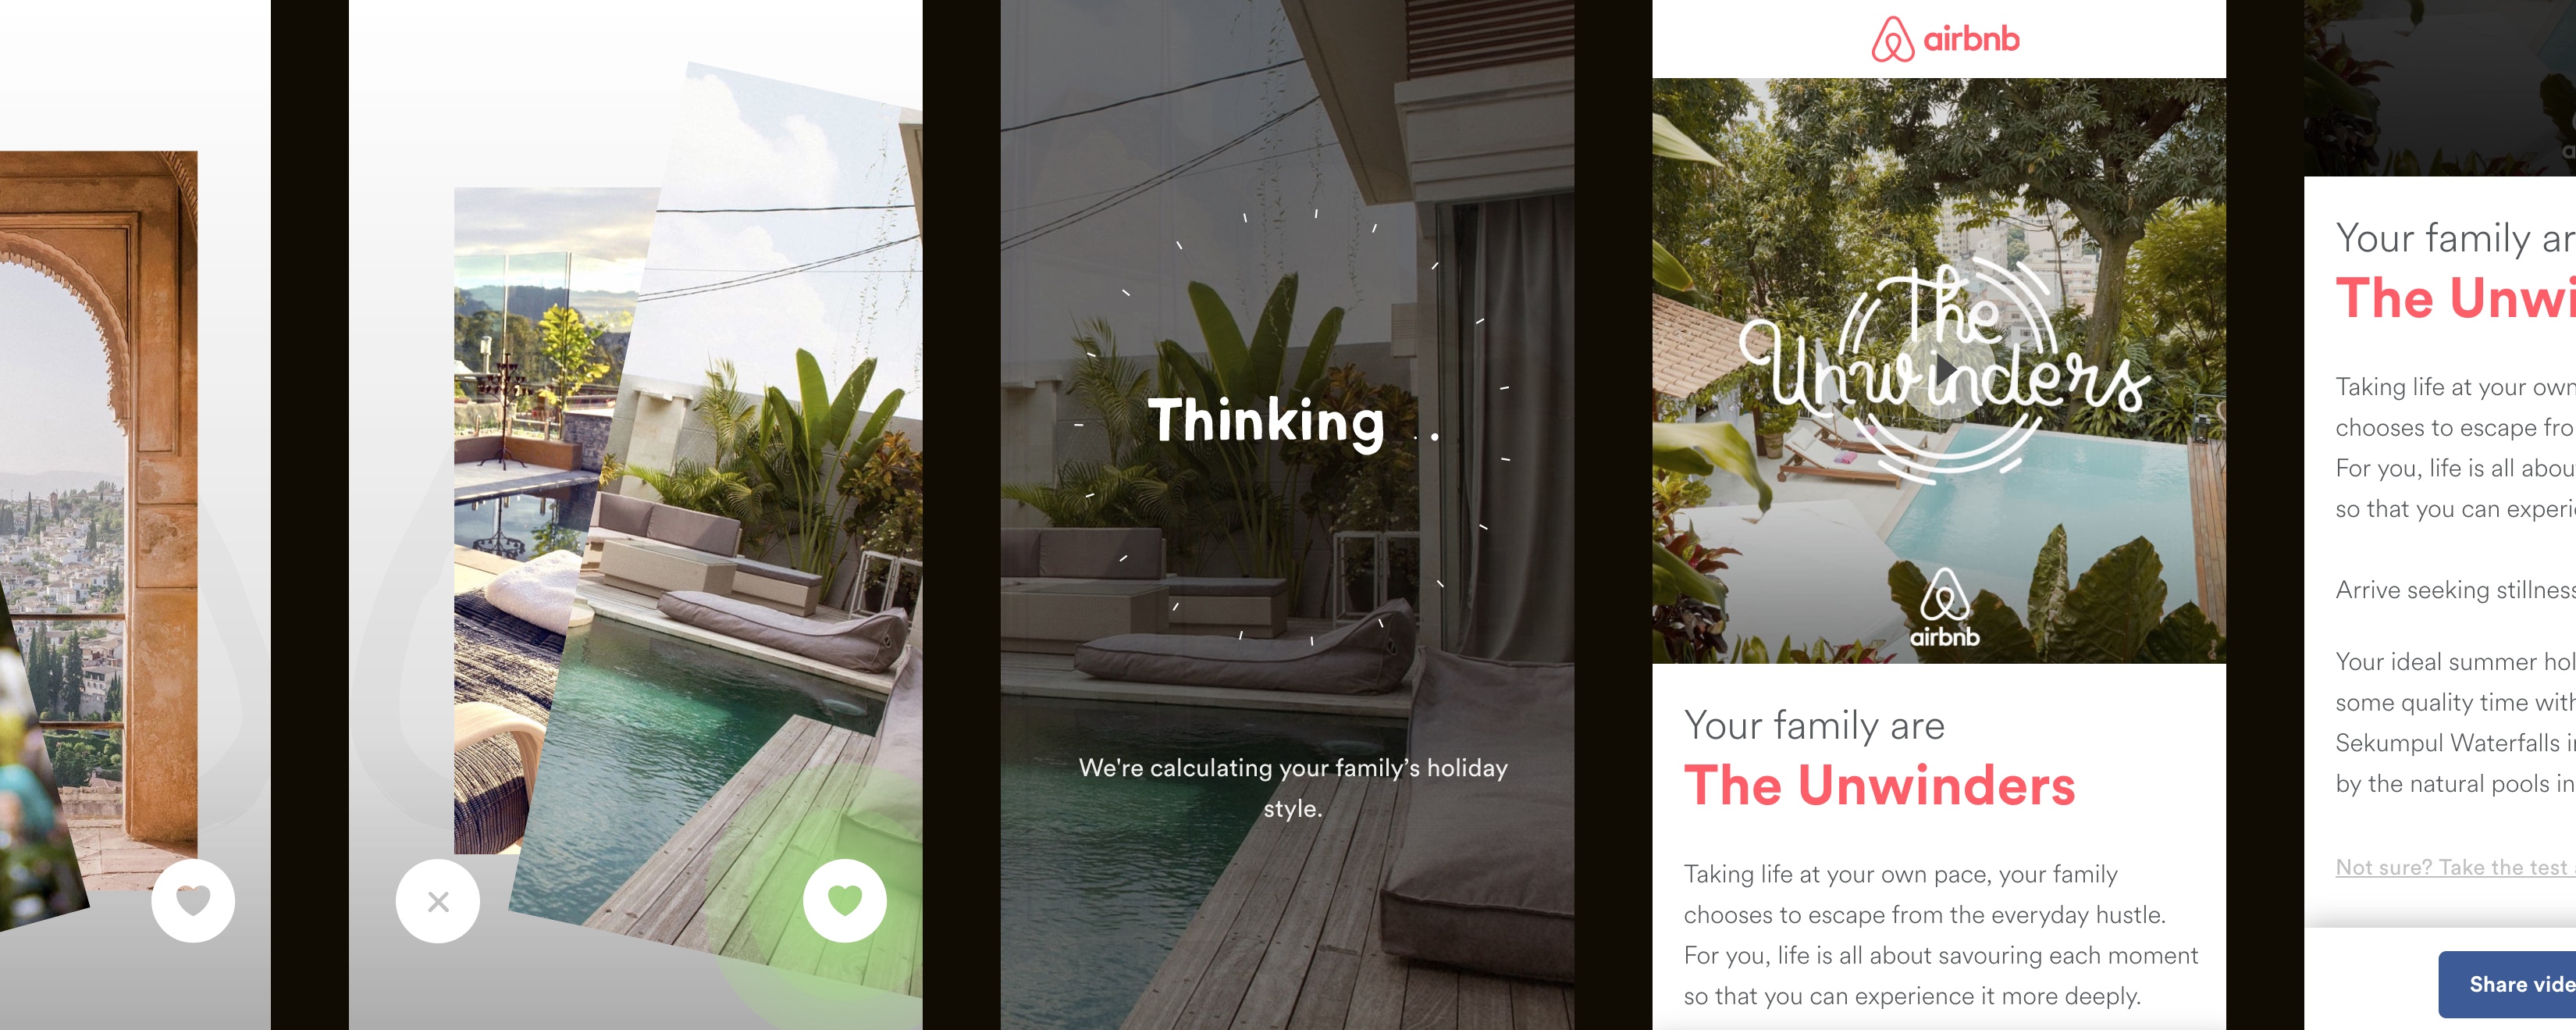 airbnb14—mobile2